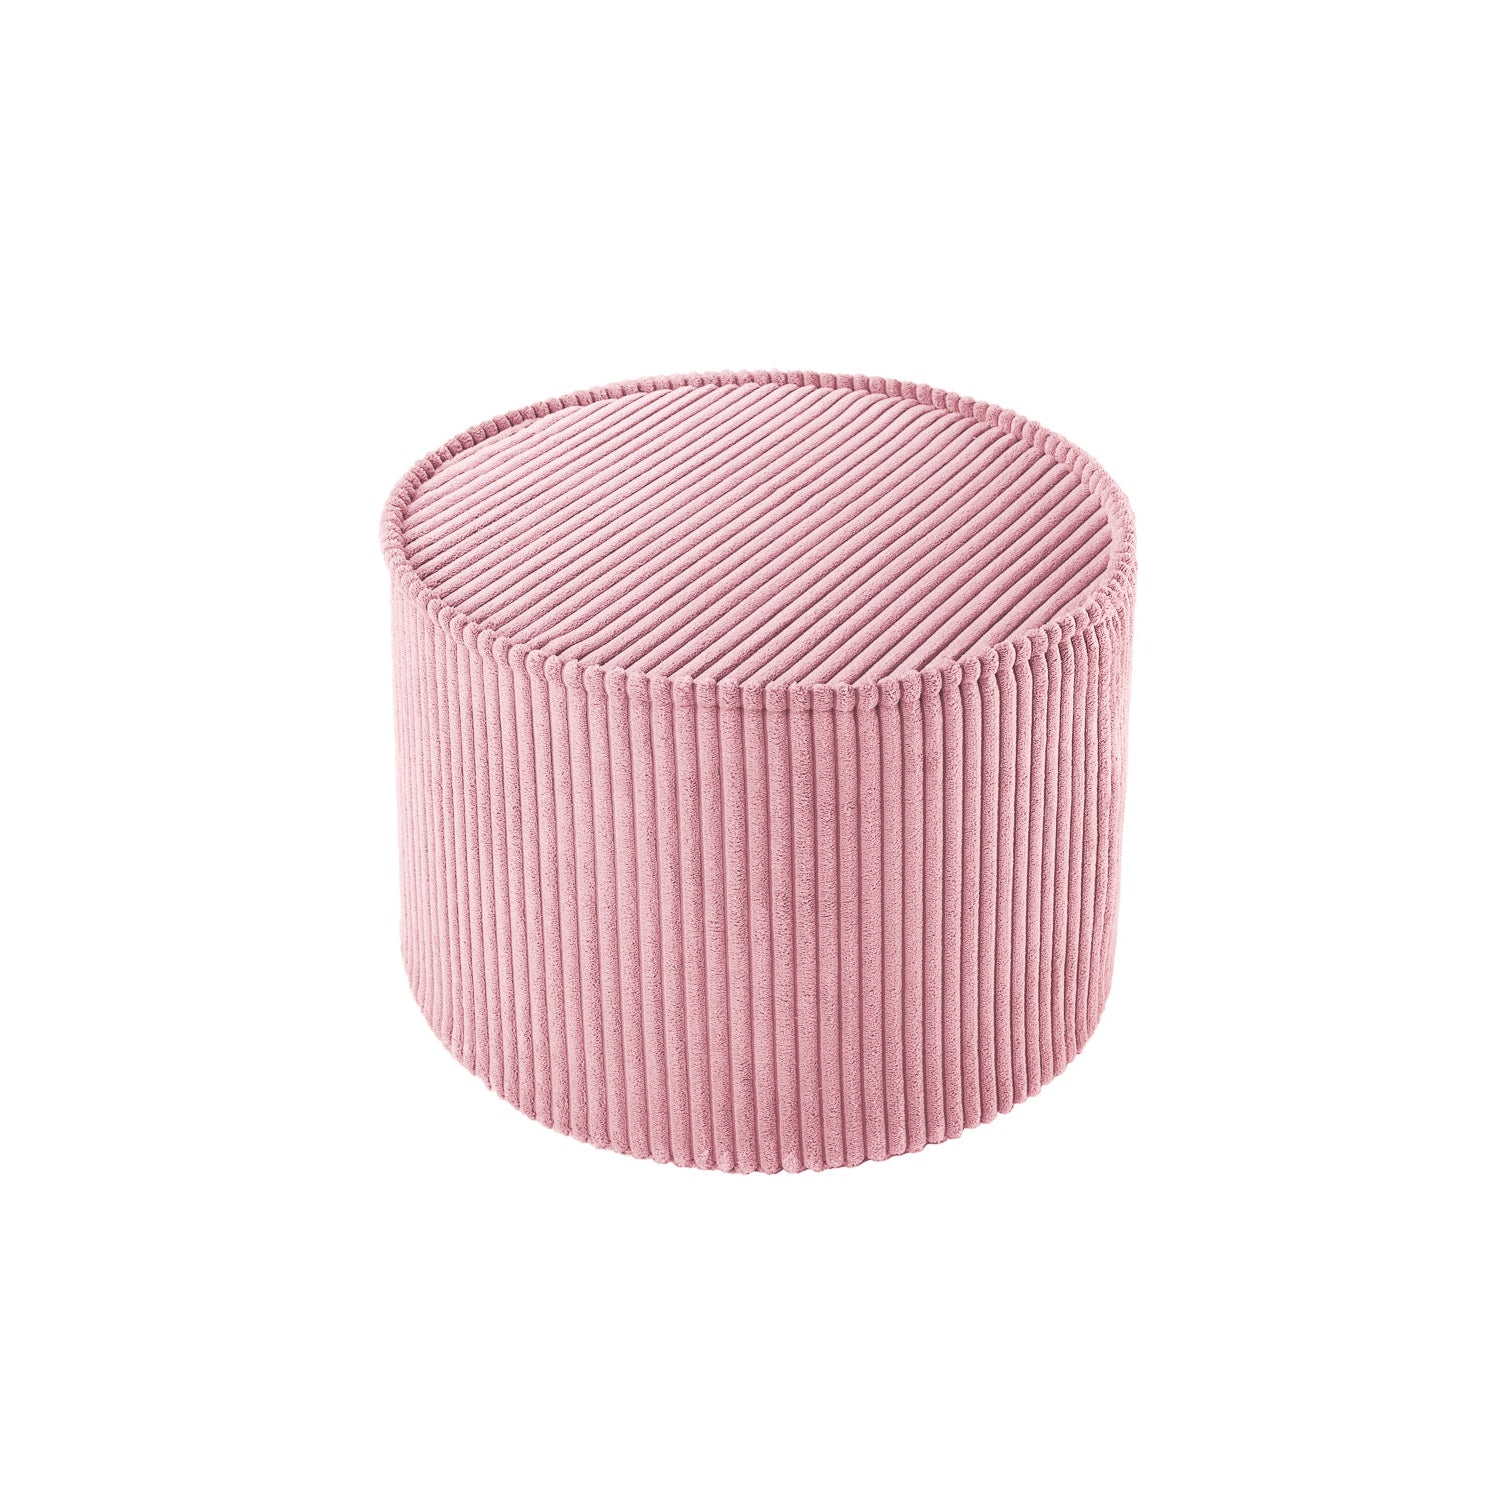 Wigiwama Pink Mousse Pouffe at Rugs by Roo